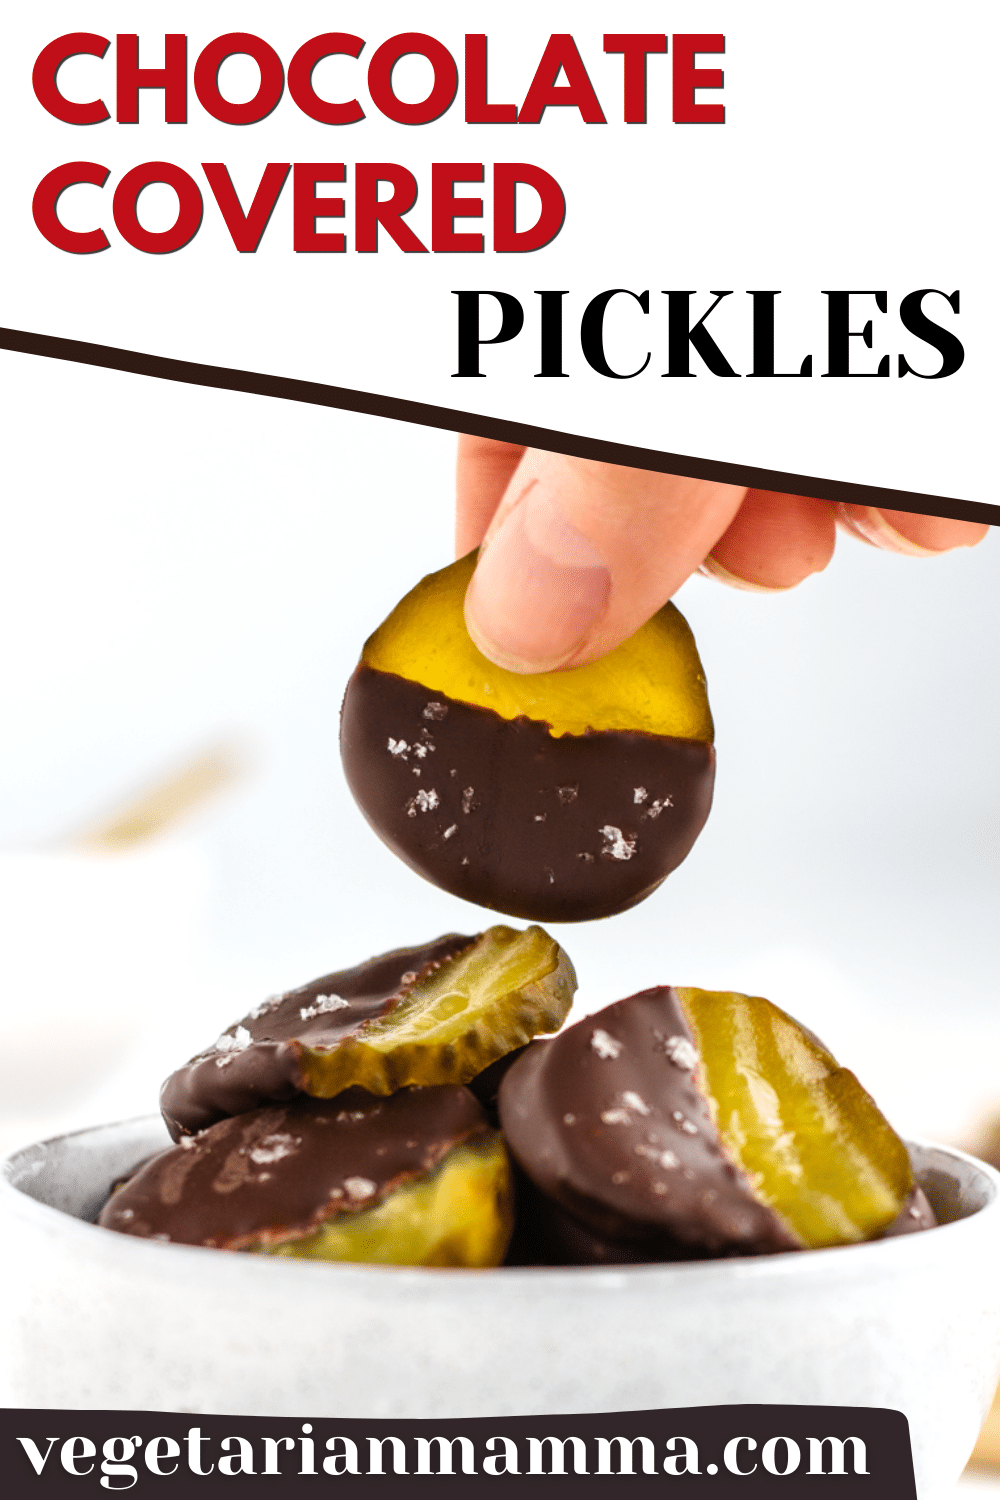 Chocolate Covered Pickles are a unique food combination that is oddly so delicious. This unusual sweet and salty combo will become your new obsession.  | pickles | chocolate | chocolate covered | vegan snack | sweet and salty